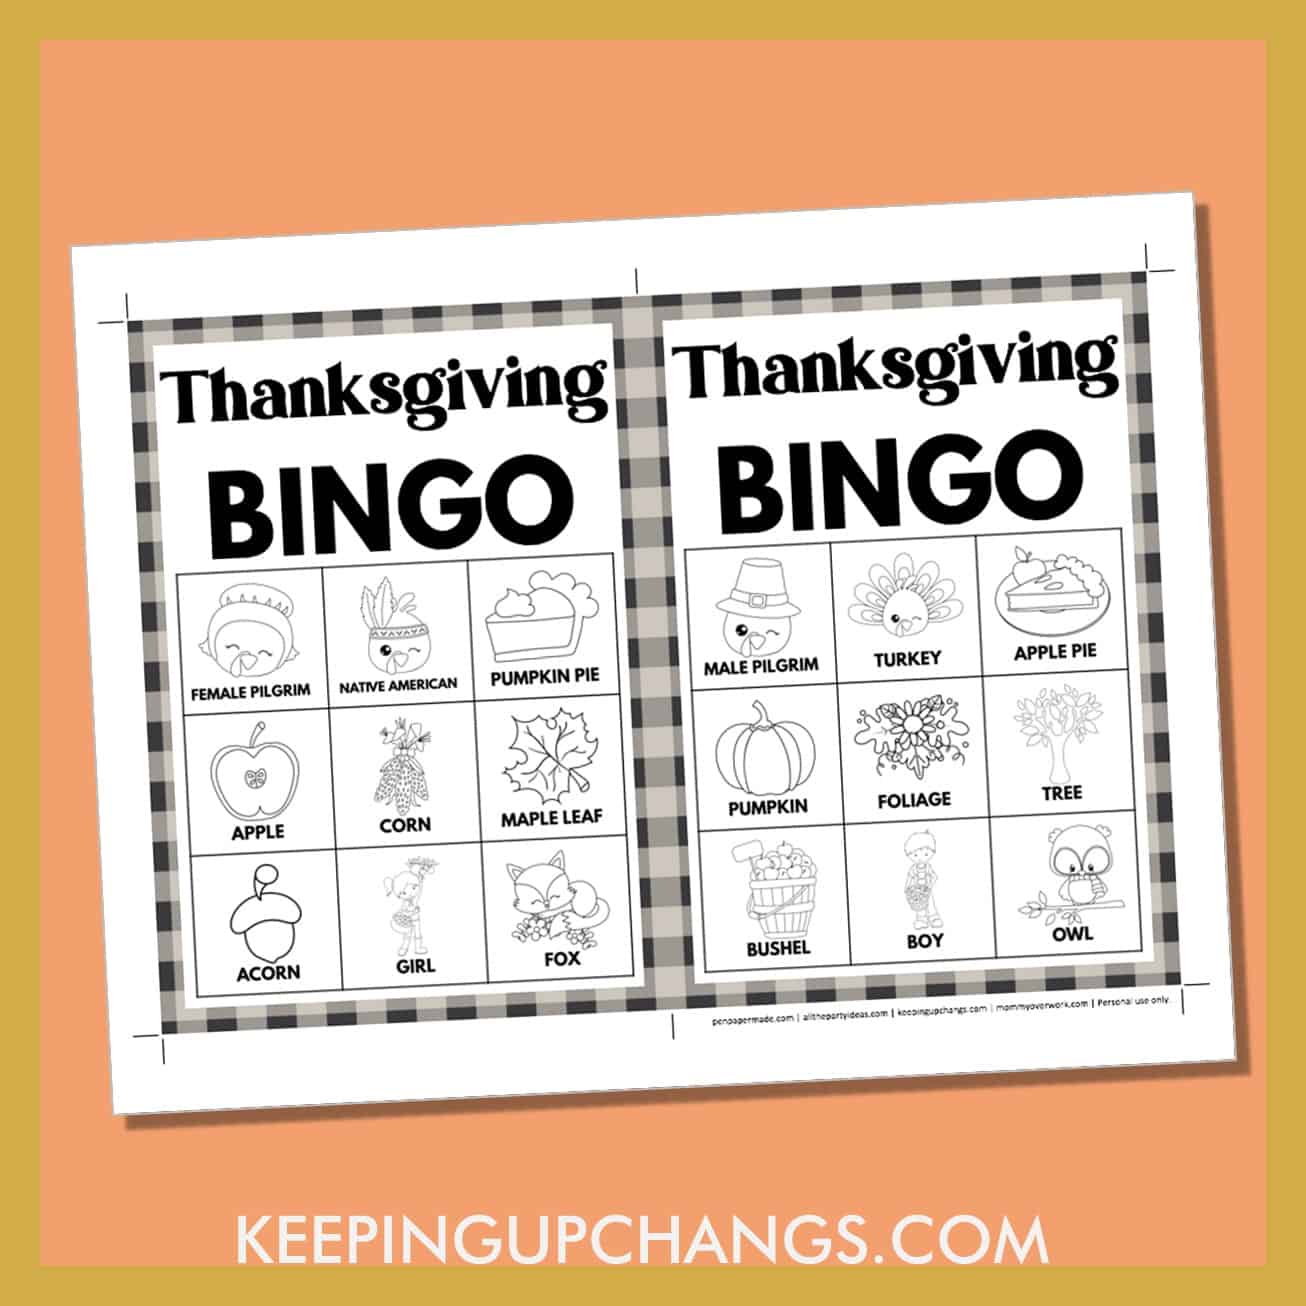 free fall thanksgiving bingo card 3x3 5x7 black white coloring game boards with images and text words.